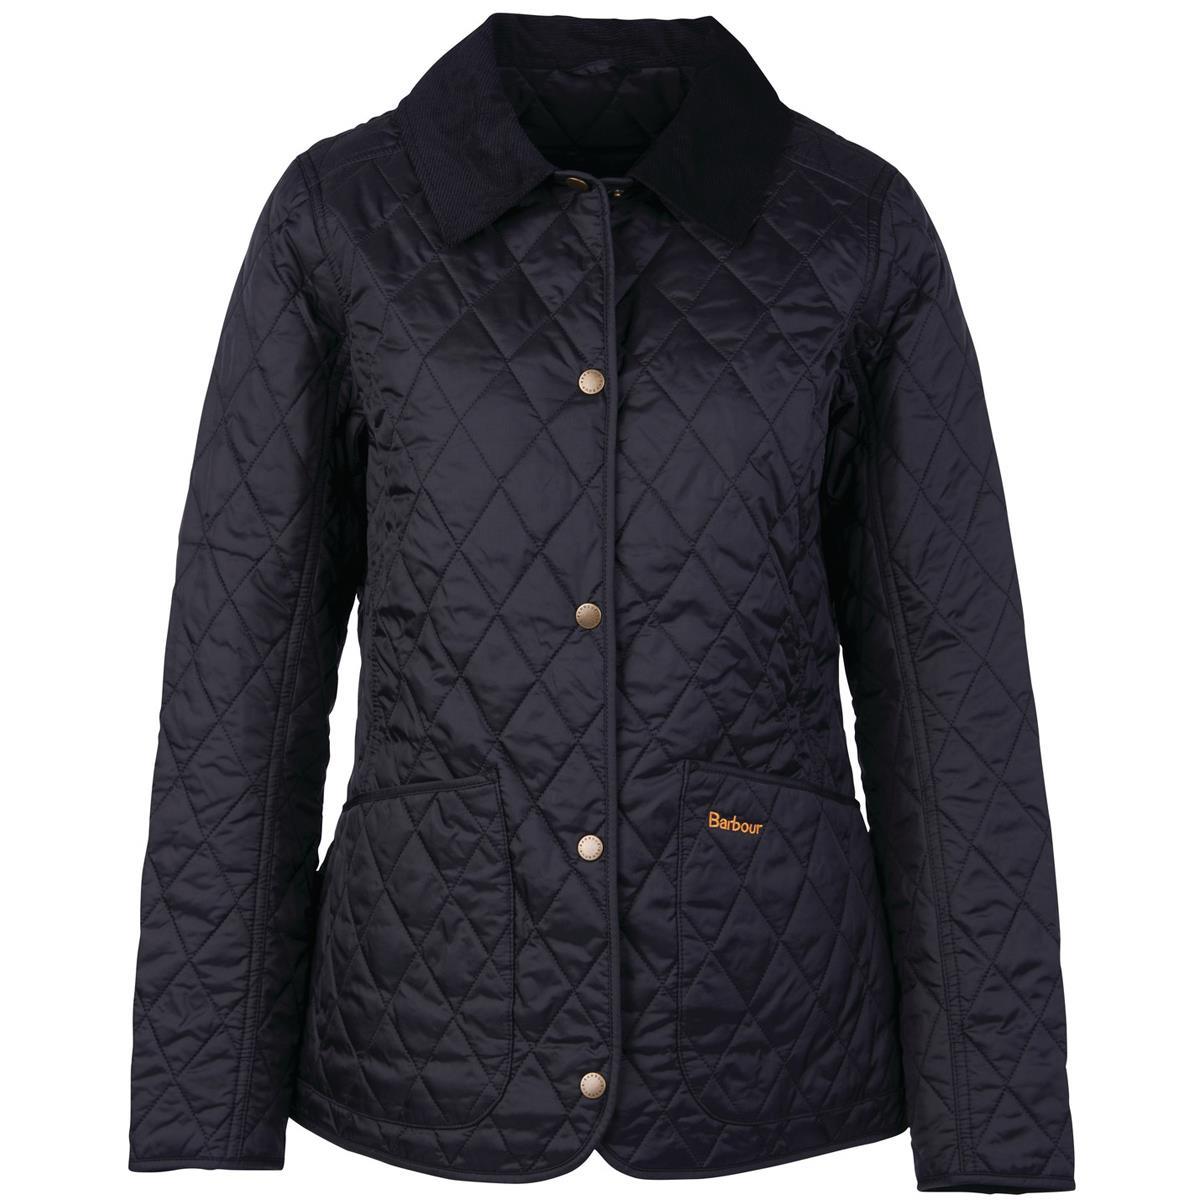 What is the reference number for the Barbour Annandale Quilted Jacket?